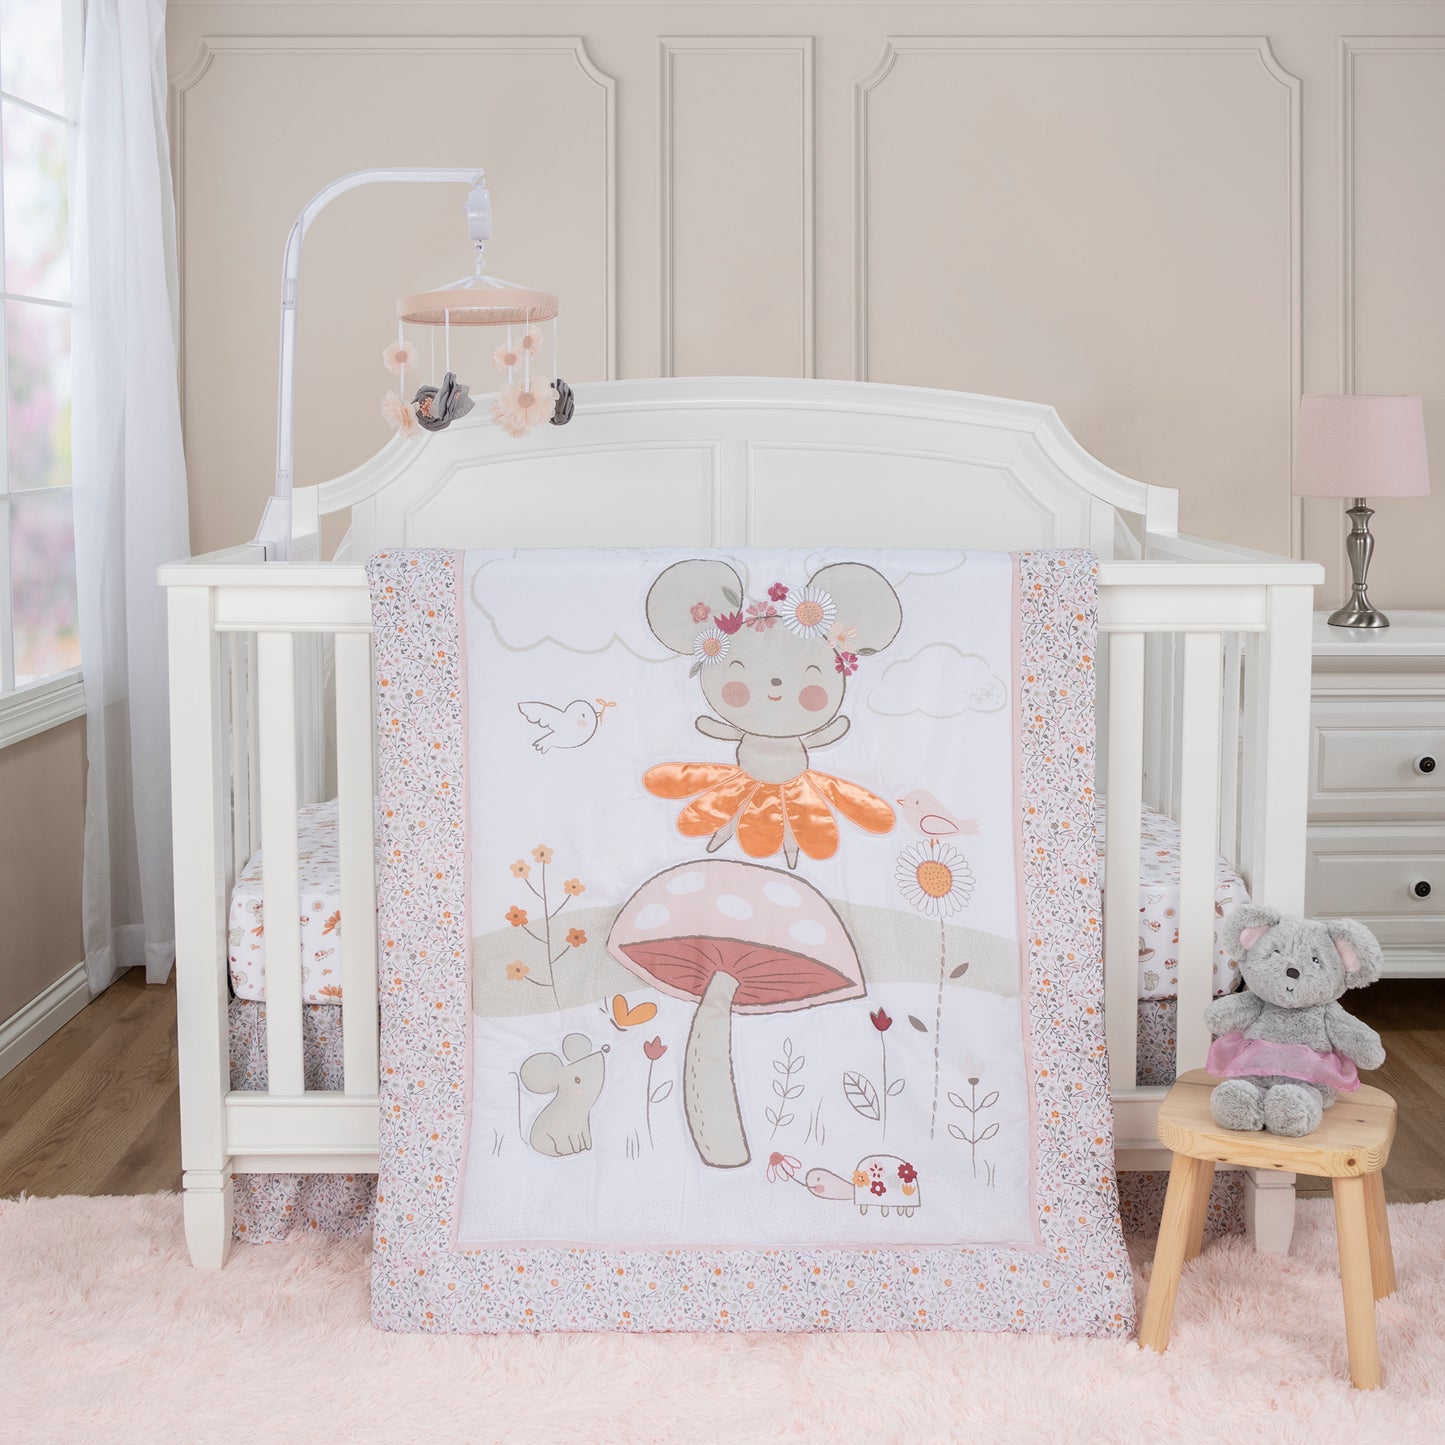 Dancing Mouse 4 Piece Crib Bedding Set by Sammy & Lou® in a stylized bedroom.  The nursery quilt, crib sheet and skirt sit on a modern white crib with the mouse plush toy in front of the crib. A night stand sits to the right with a pink lamp, and floral musical mobile sits above the crib.